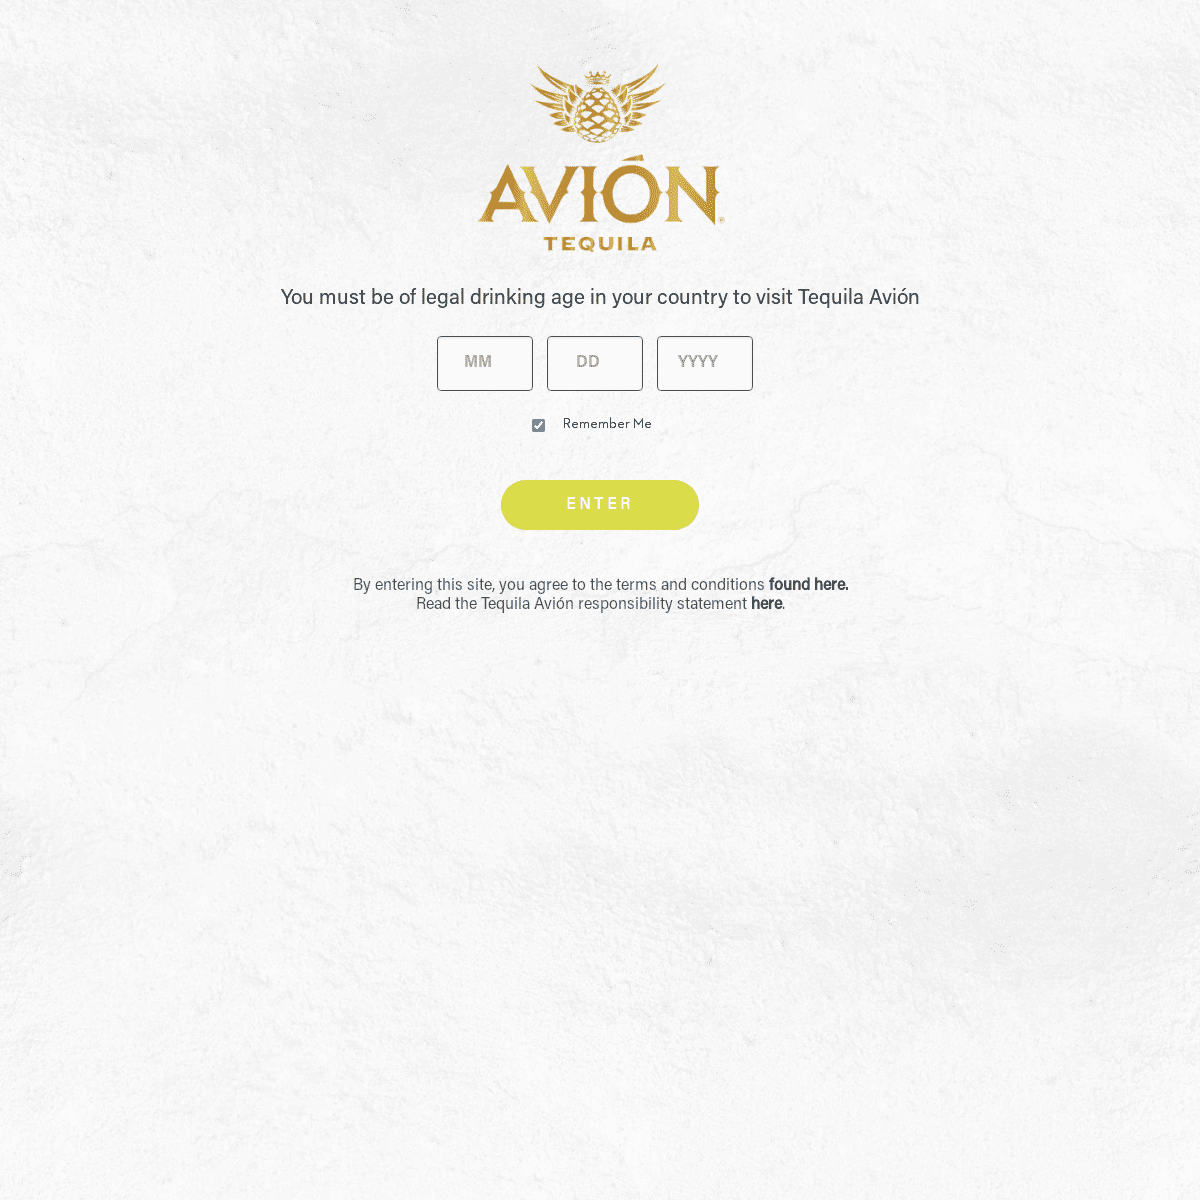 A complete backup of https://tequilaavion.com